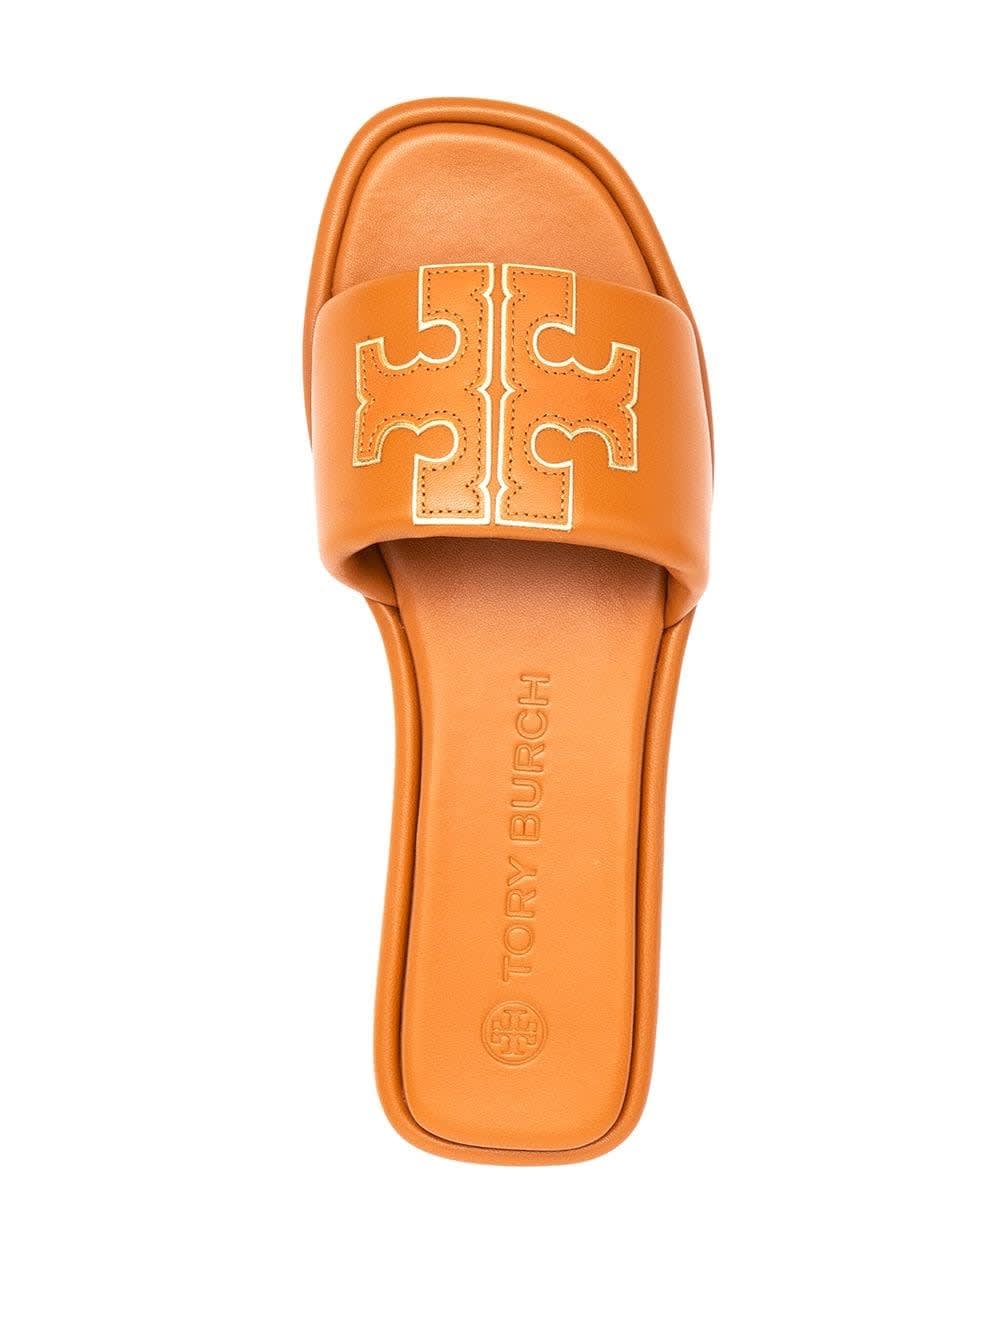 Buy Tory Burch Leather Slide Sandals With Logo online, shop Tory Burch shoes with free shipping